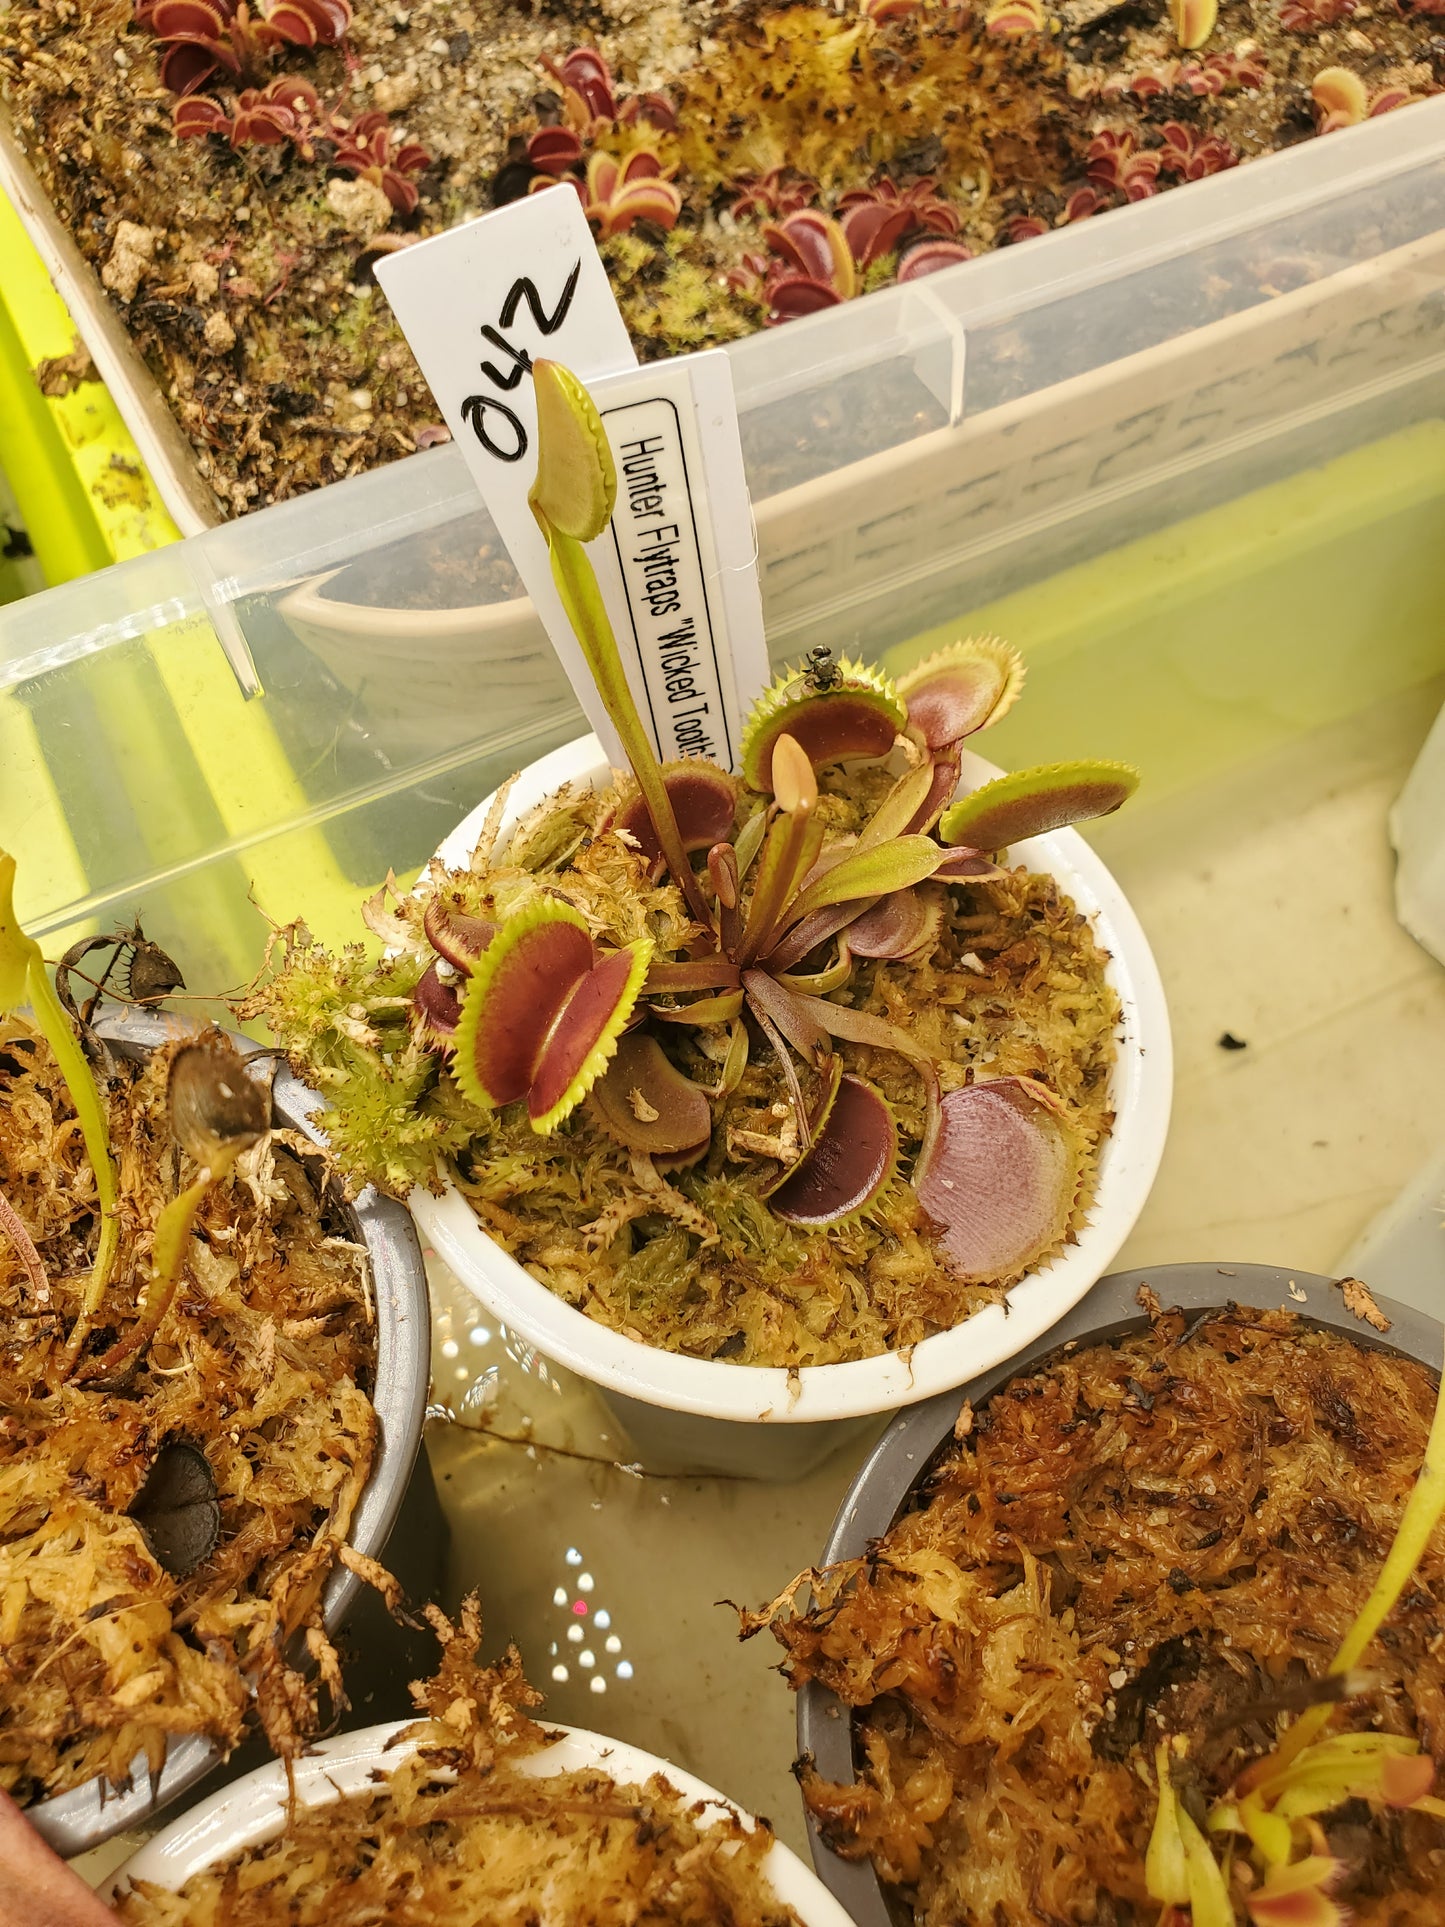 Get me that plant - 042 - Hunter Flytraps Wicked Tooth Venus Flytrap Carnivorous plant